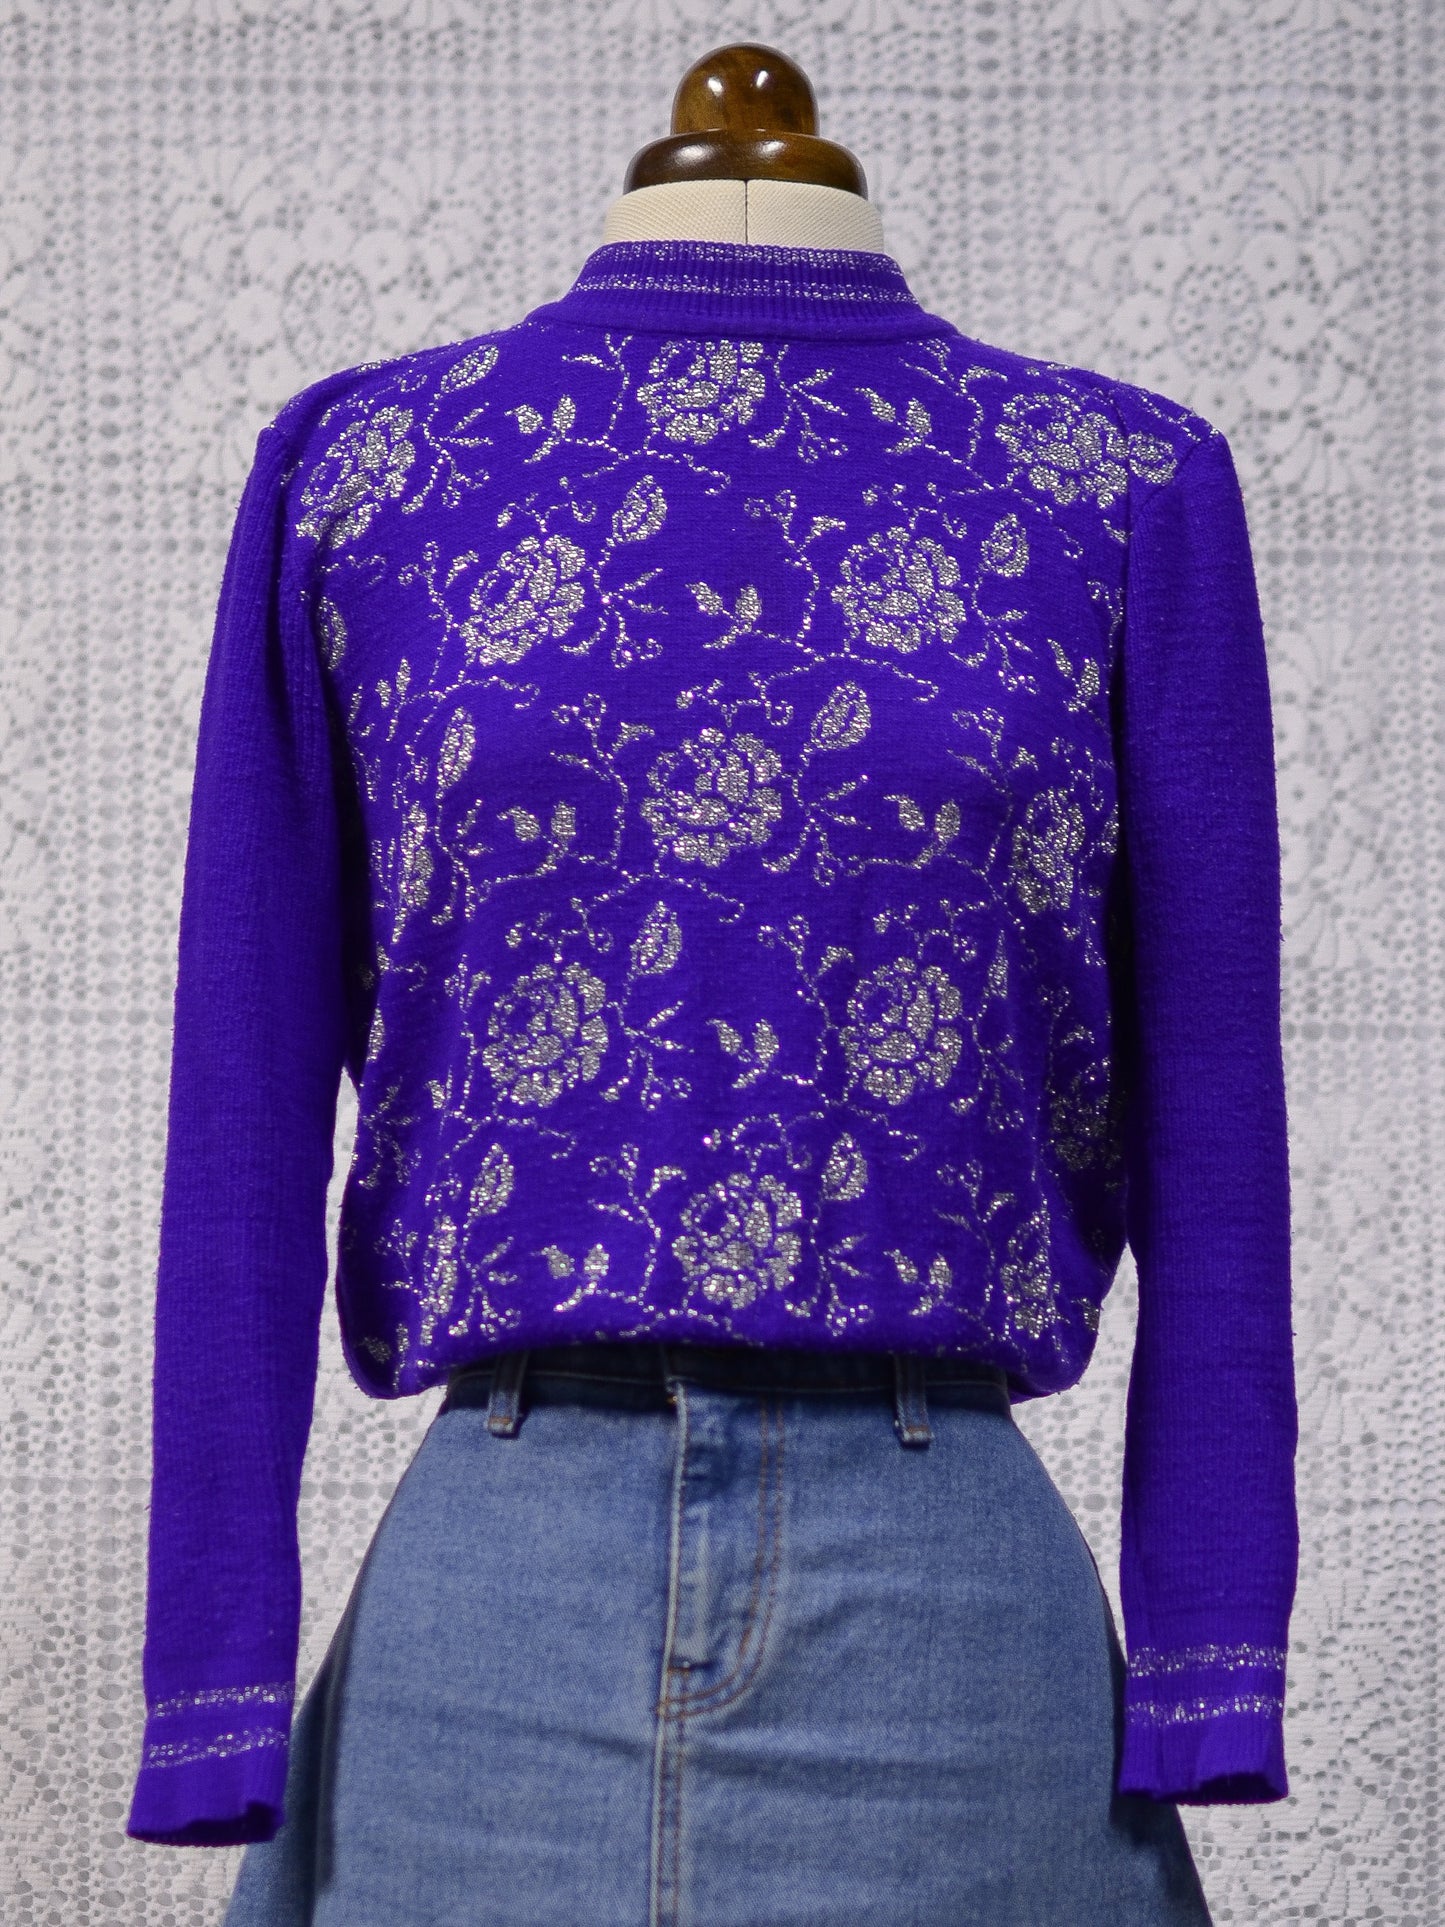 1970s purple and silver glittery rose floral pattern fitted high neck jumper